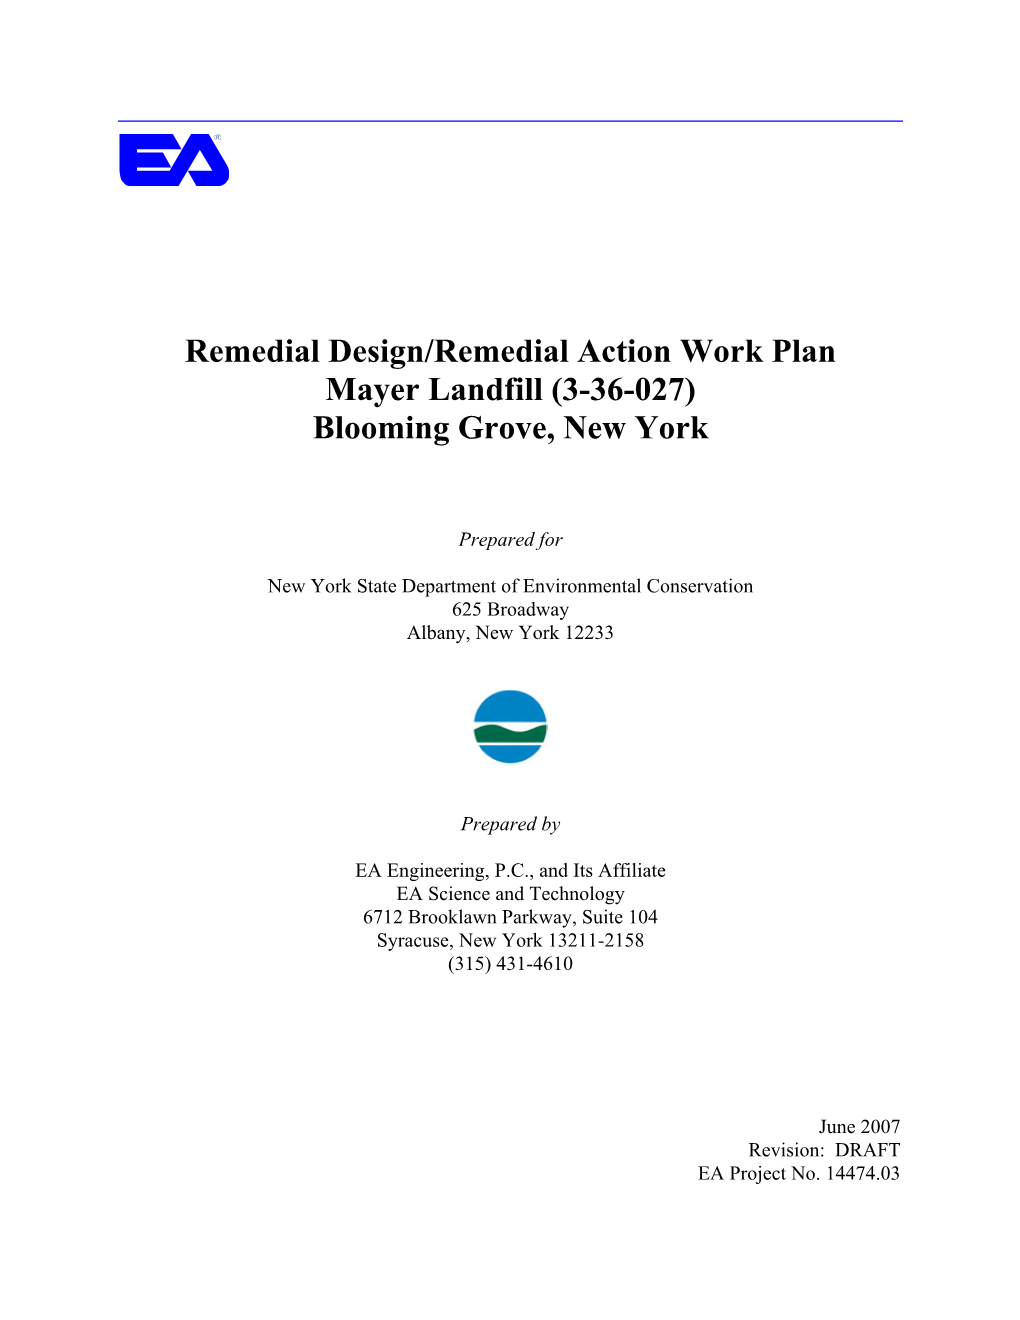 Remedial Design/Remedial Action Work Plan Mayer Landfill (3-36-027) Blooming Grove, New York